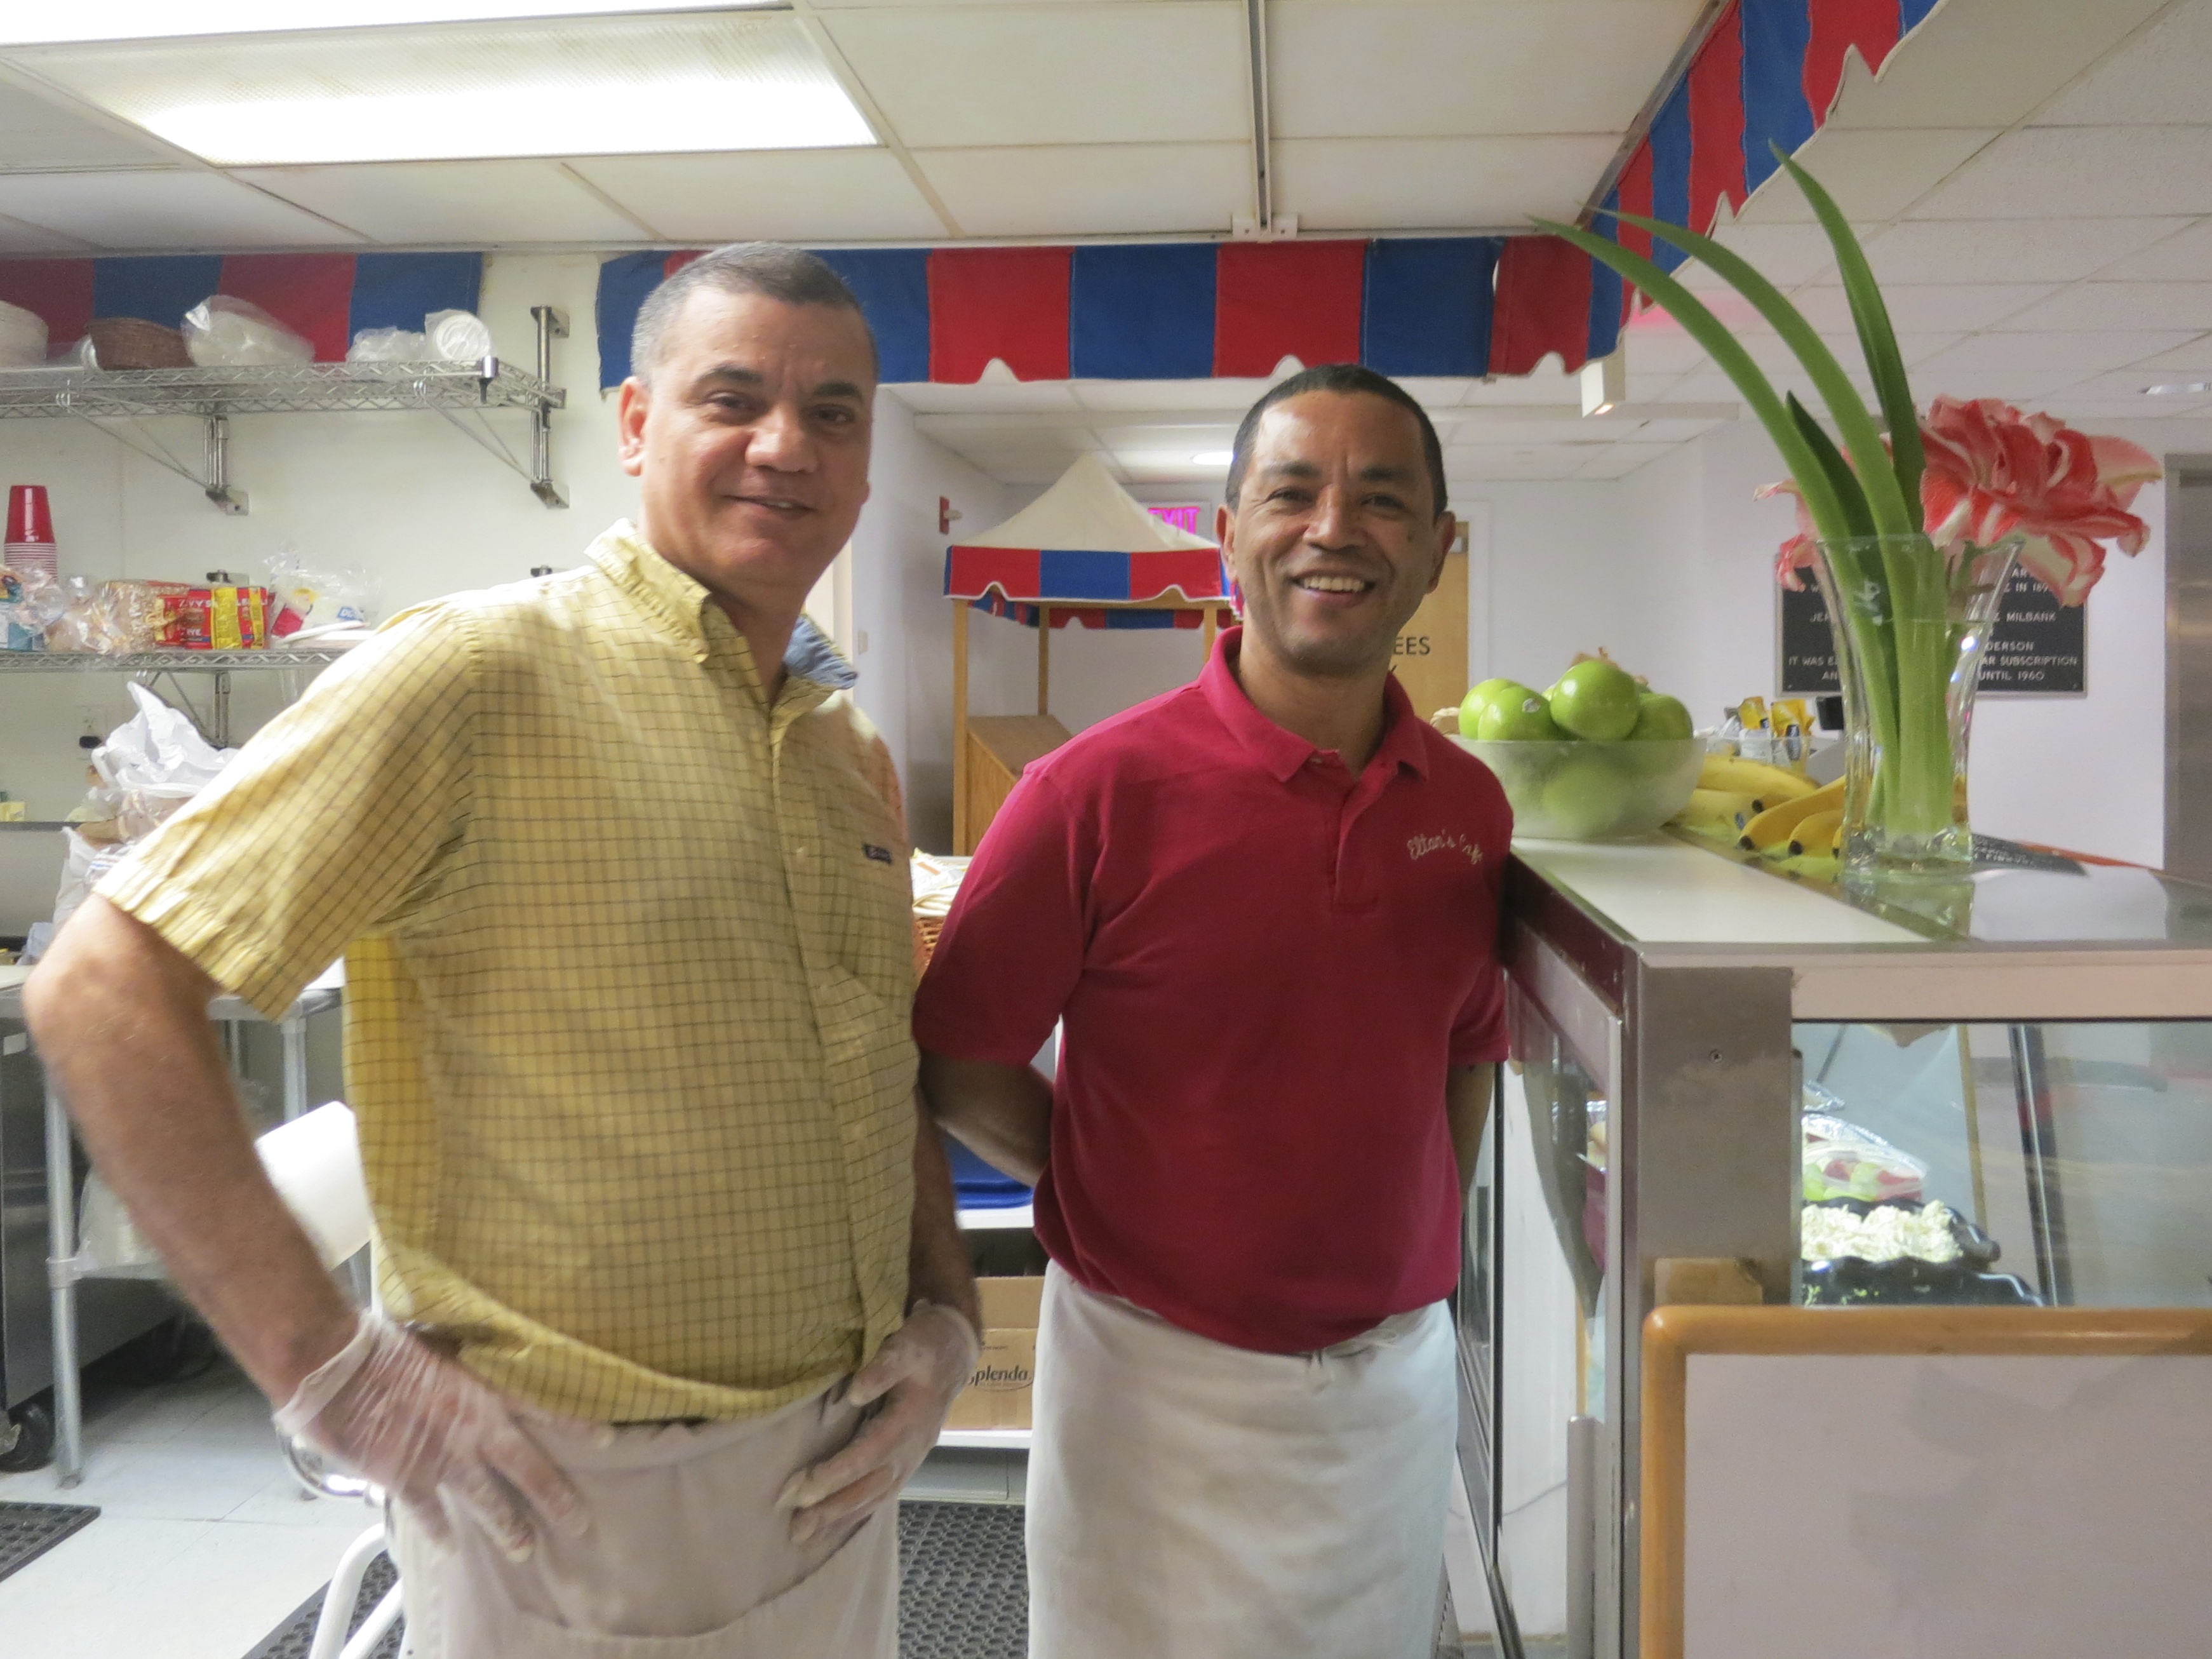 Ailton Sousa and Jose Santos at Elton's Café in Greenwich Library. Photo: Leslie Yager